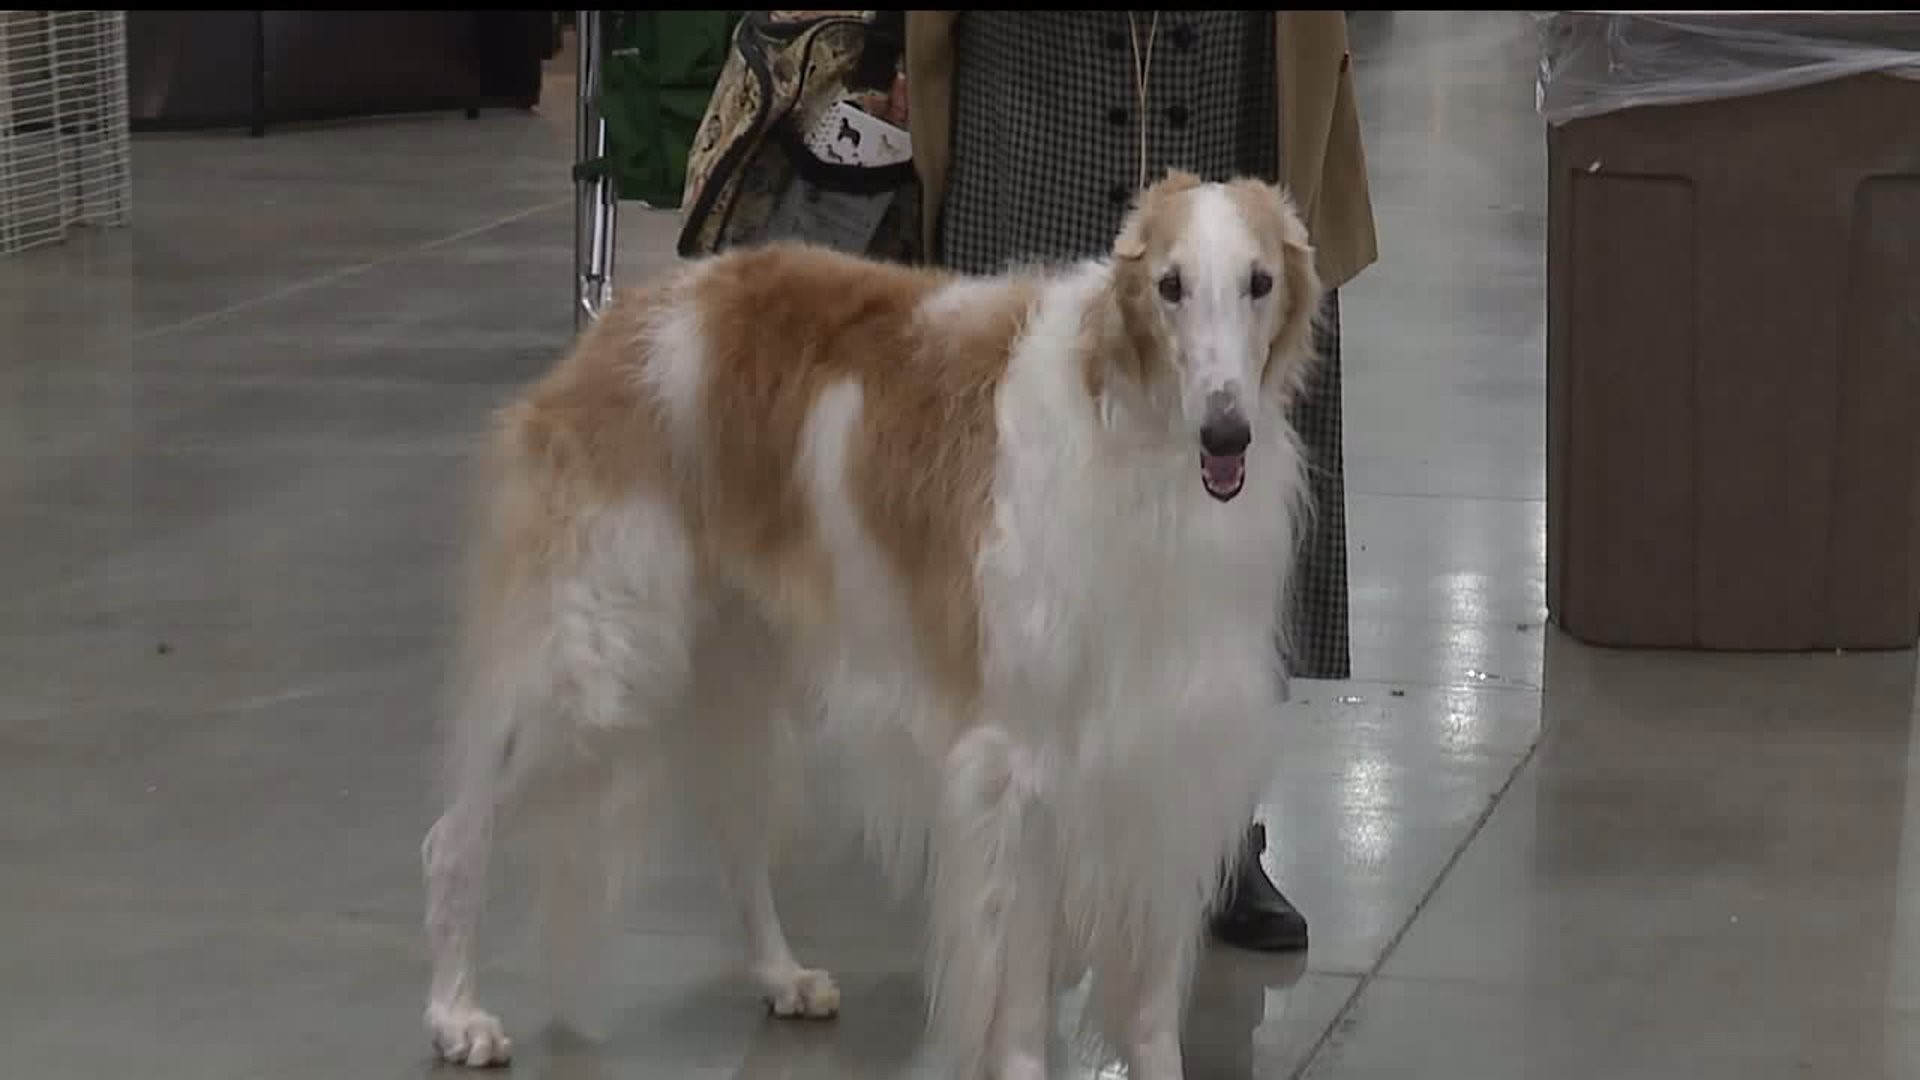 Celtic Classic Dog Show brings thousands of pups to the York Fairgrounds